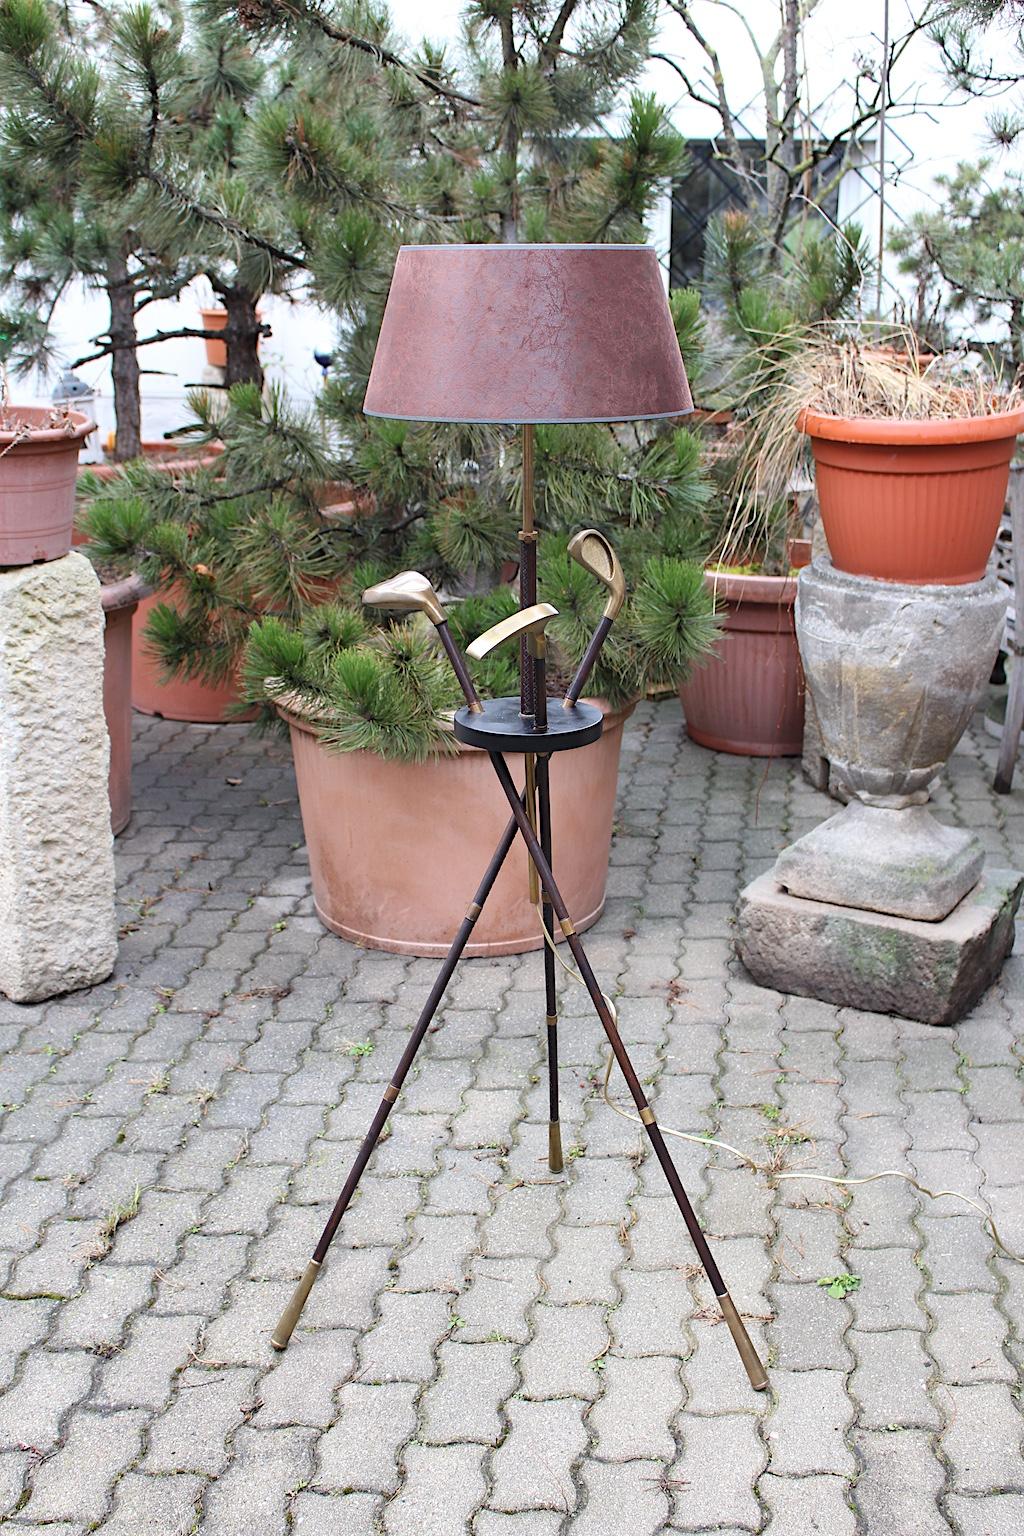 An extraordinary high quality vintage golf club floor lamp attributed to Jacques Adnet 1940s France, which was made out of stitched leather, solid brass, brassed metal and black lacquered wood.
Three different types of golf clubs are held by a